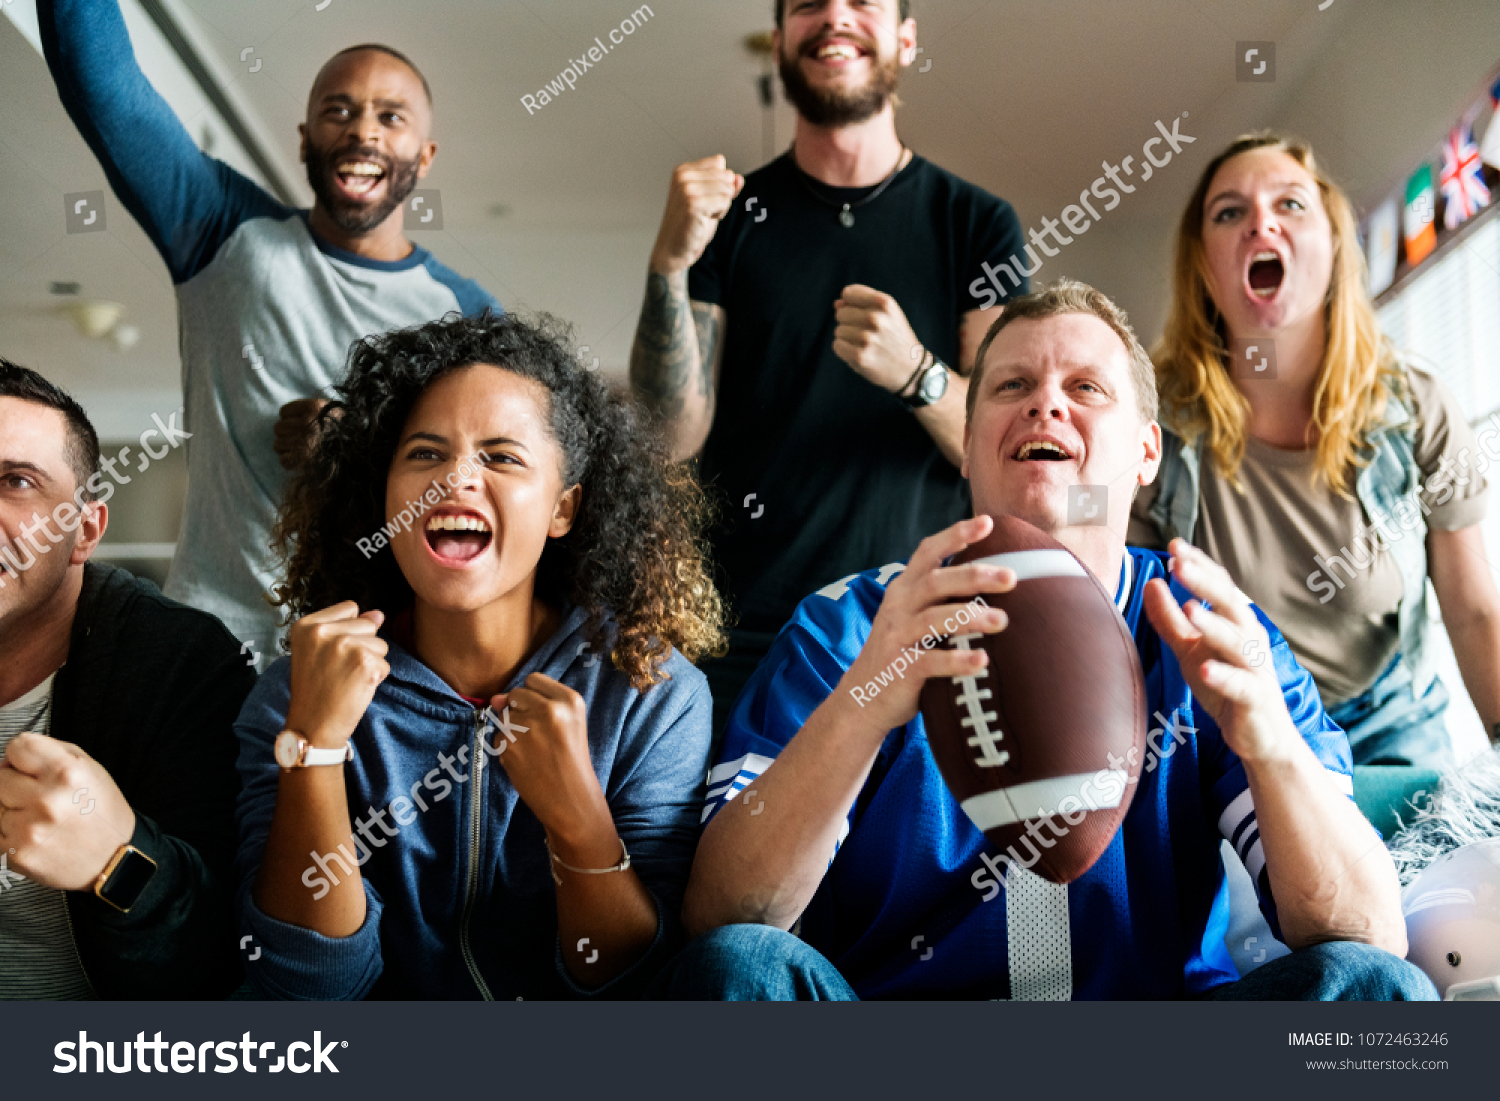 Friends cheering sport league together #1072463246